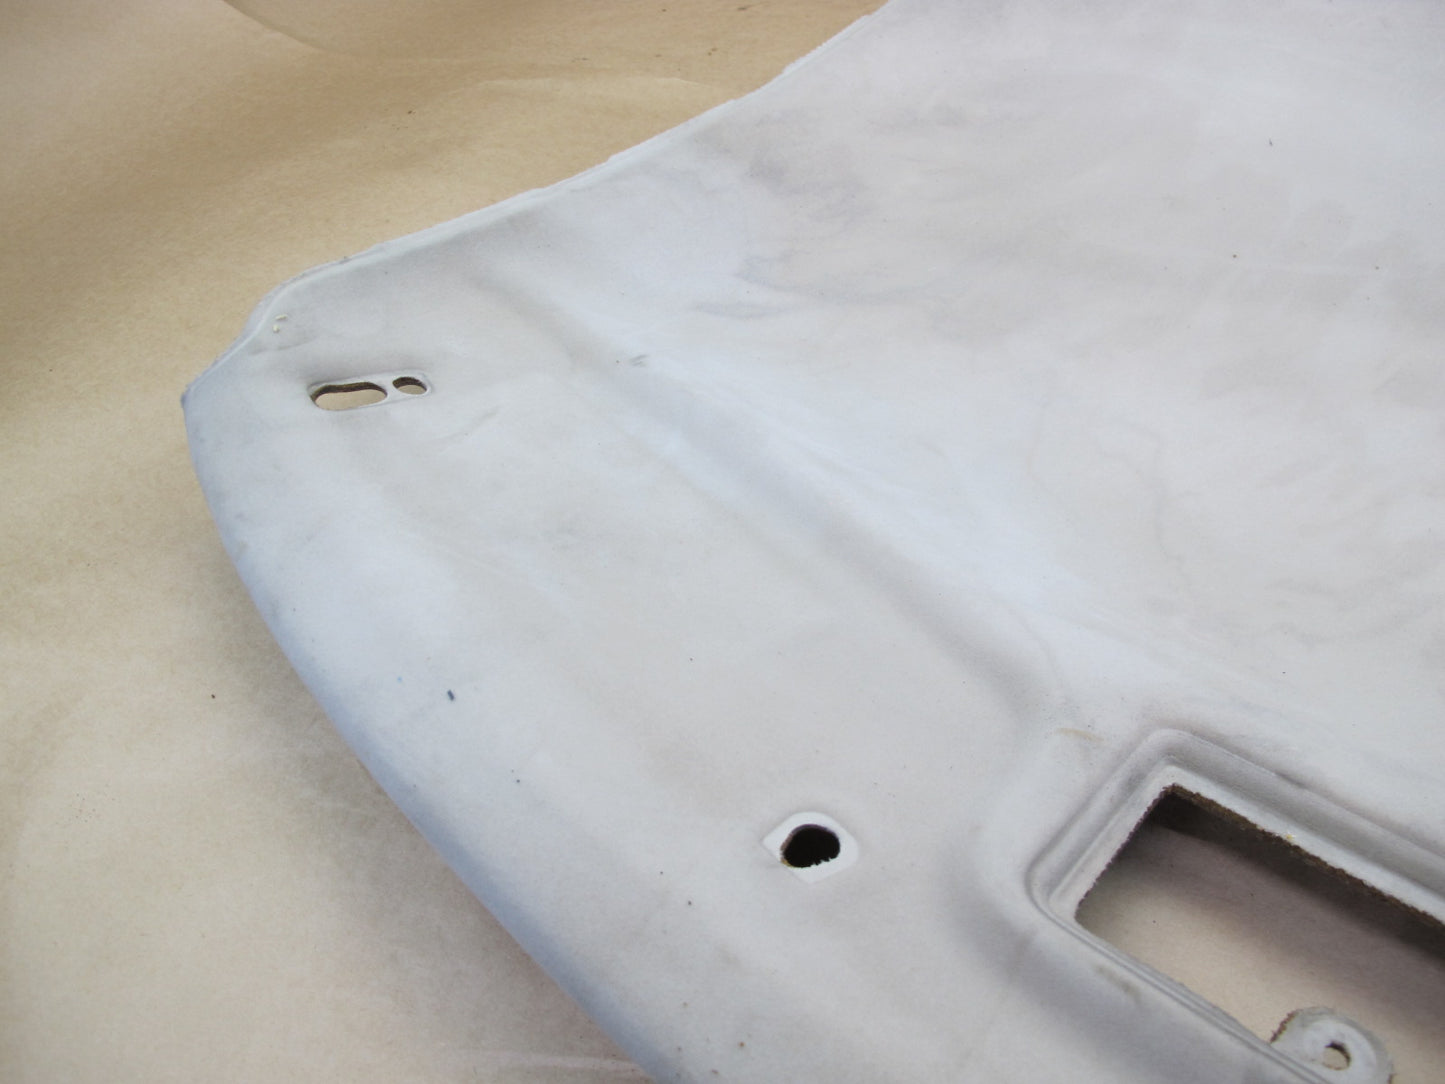 1991-1999 MITSUBISHI 3000GT DODGE STEALTH COUPE HEADLINER ROOF PANEL COVER